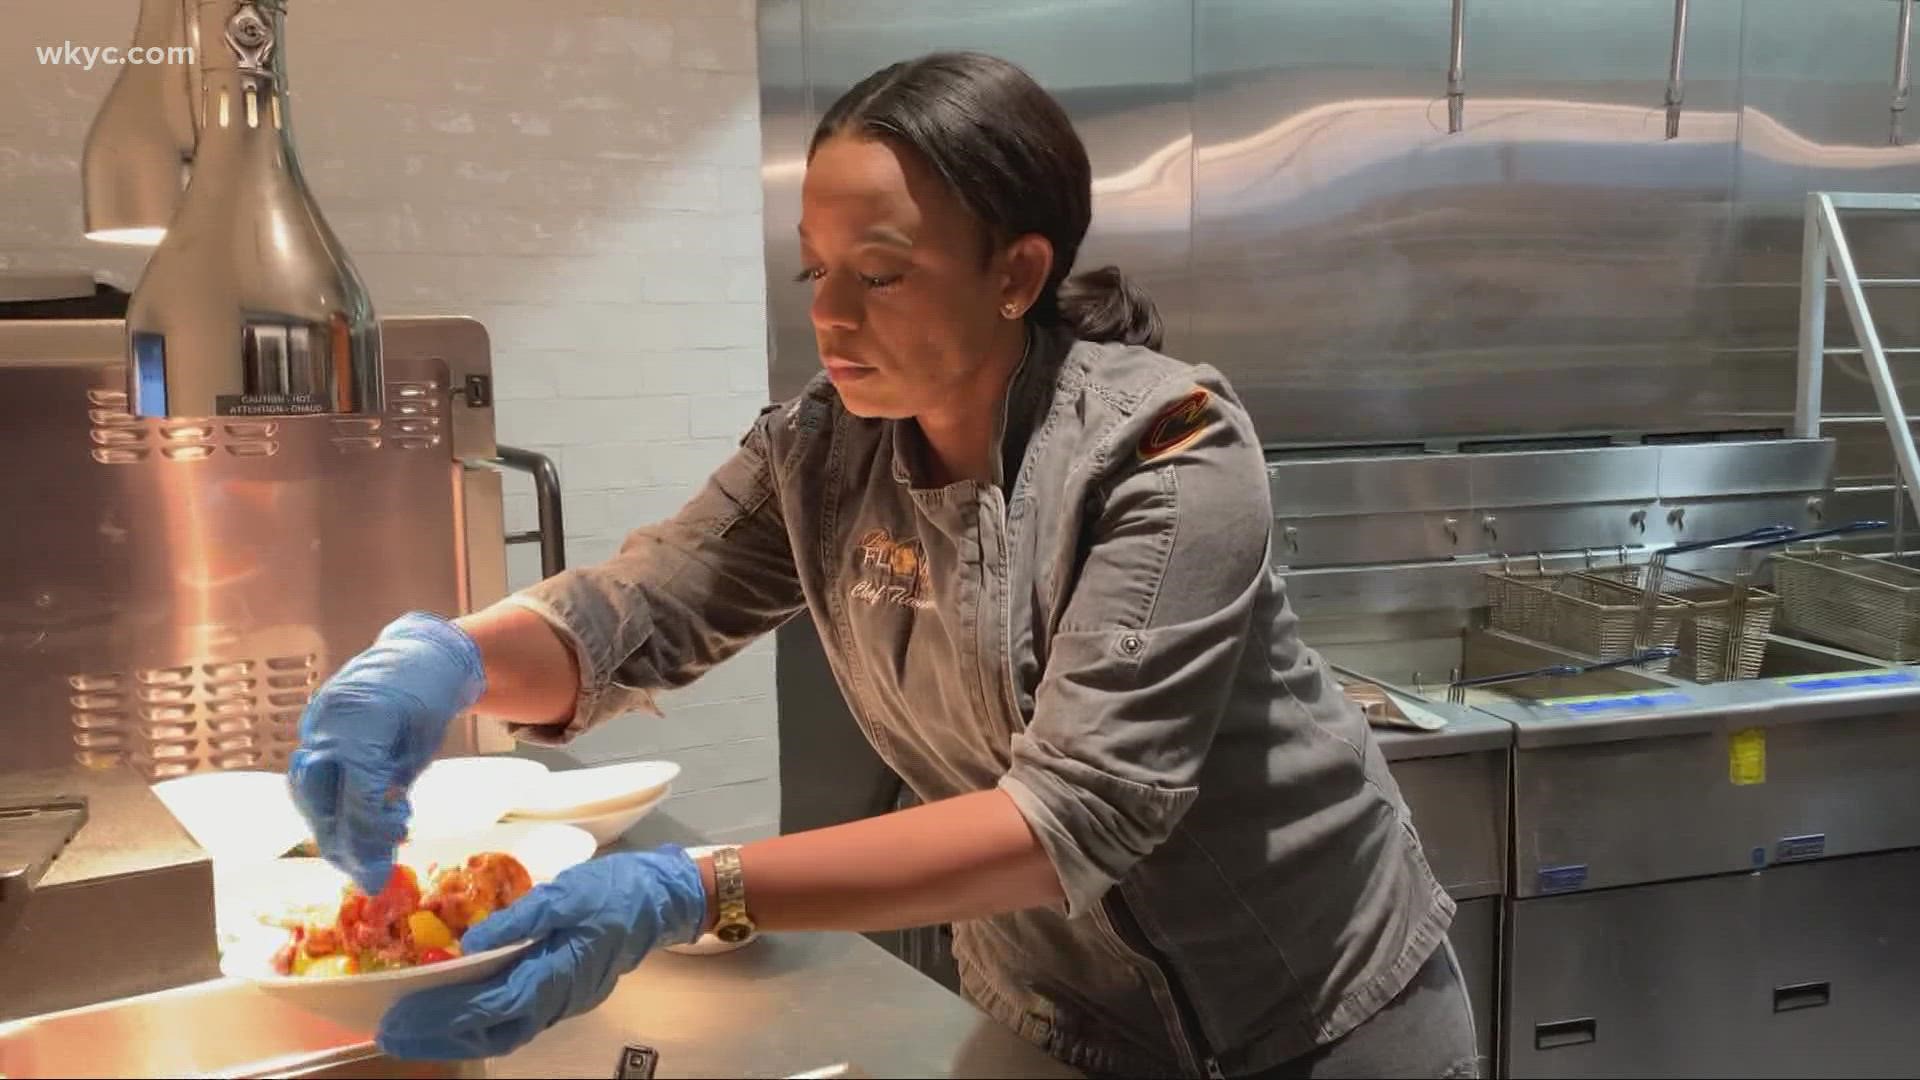 3News' Jasmine Monroe introduces us to the first Black woman to own a restaurant in Rocket Mortgage FieldHouse in Cleveland.